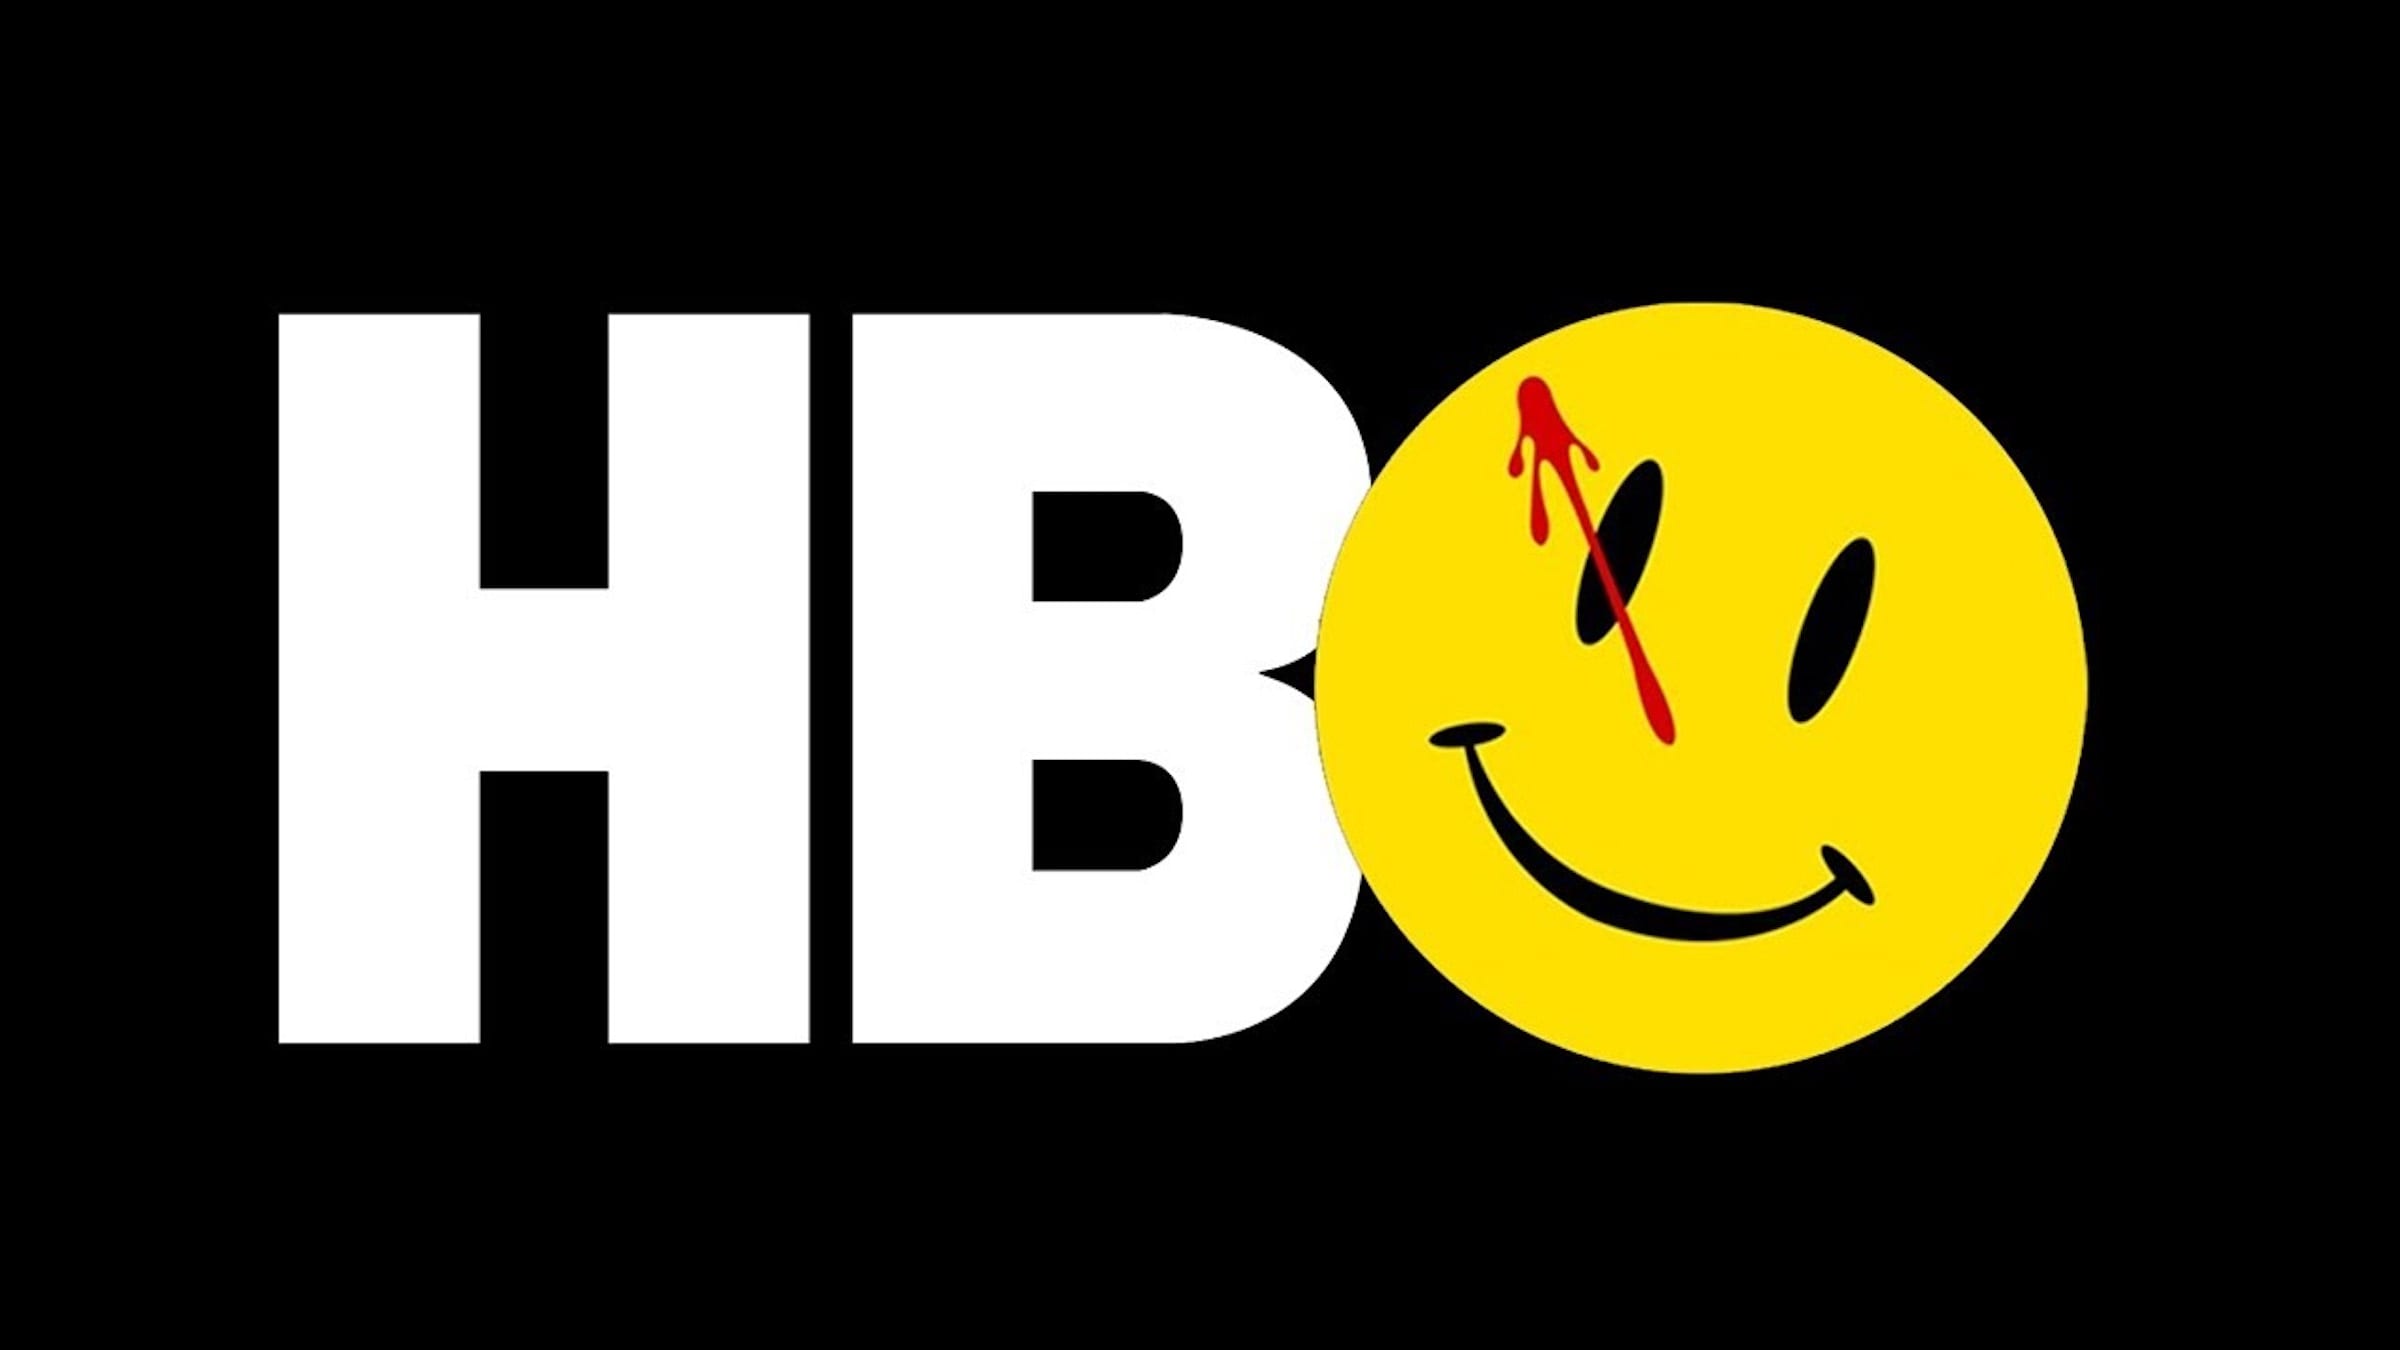 Early reviews praise HBO's new 'Watchmen' series for taking the beloved comic book story to a new level, bringing the struggles of today to the universe.